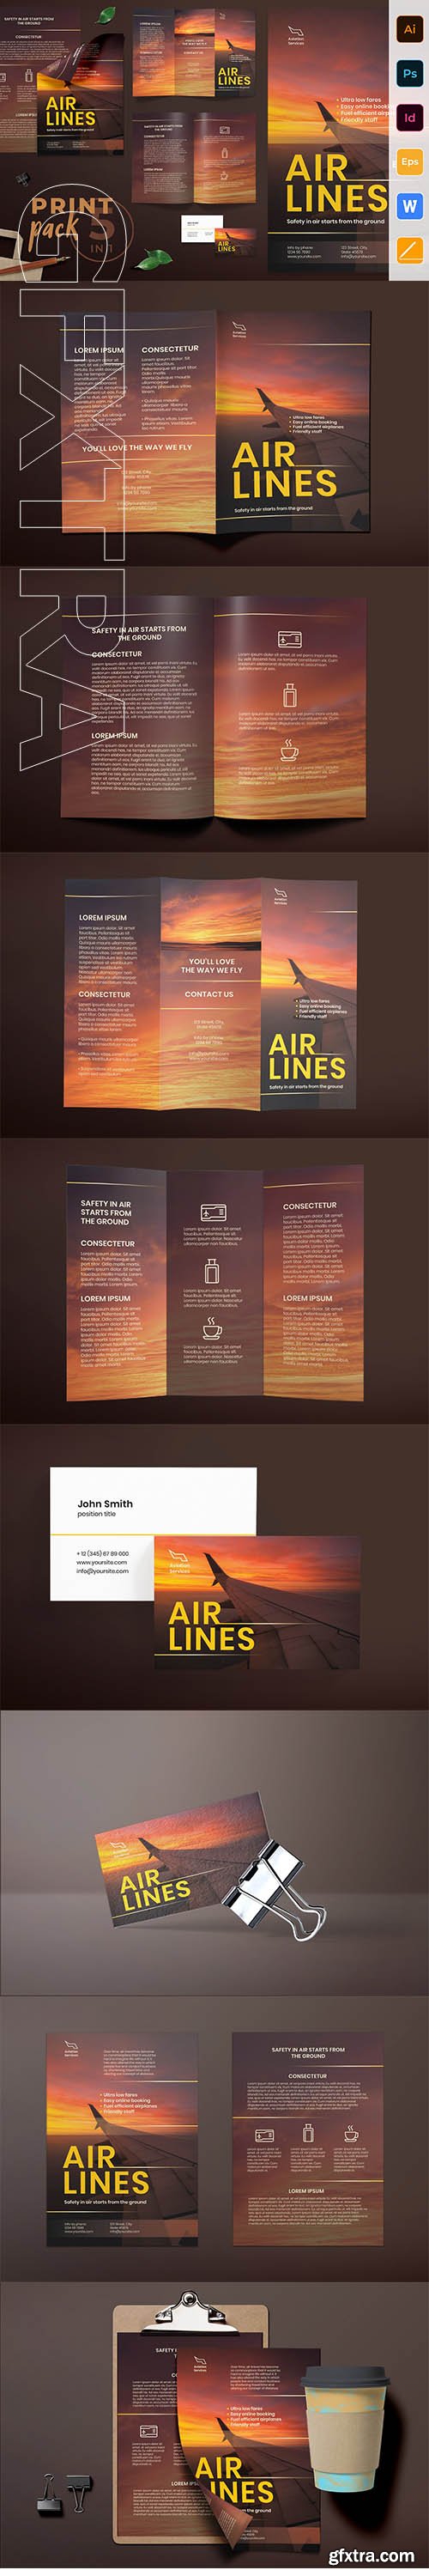 CreativeMarket - Airlines Aviation Print Pack 3713047